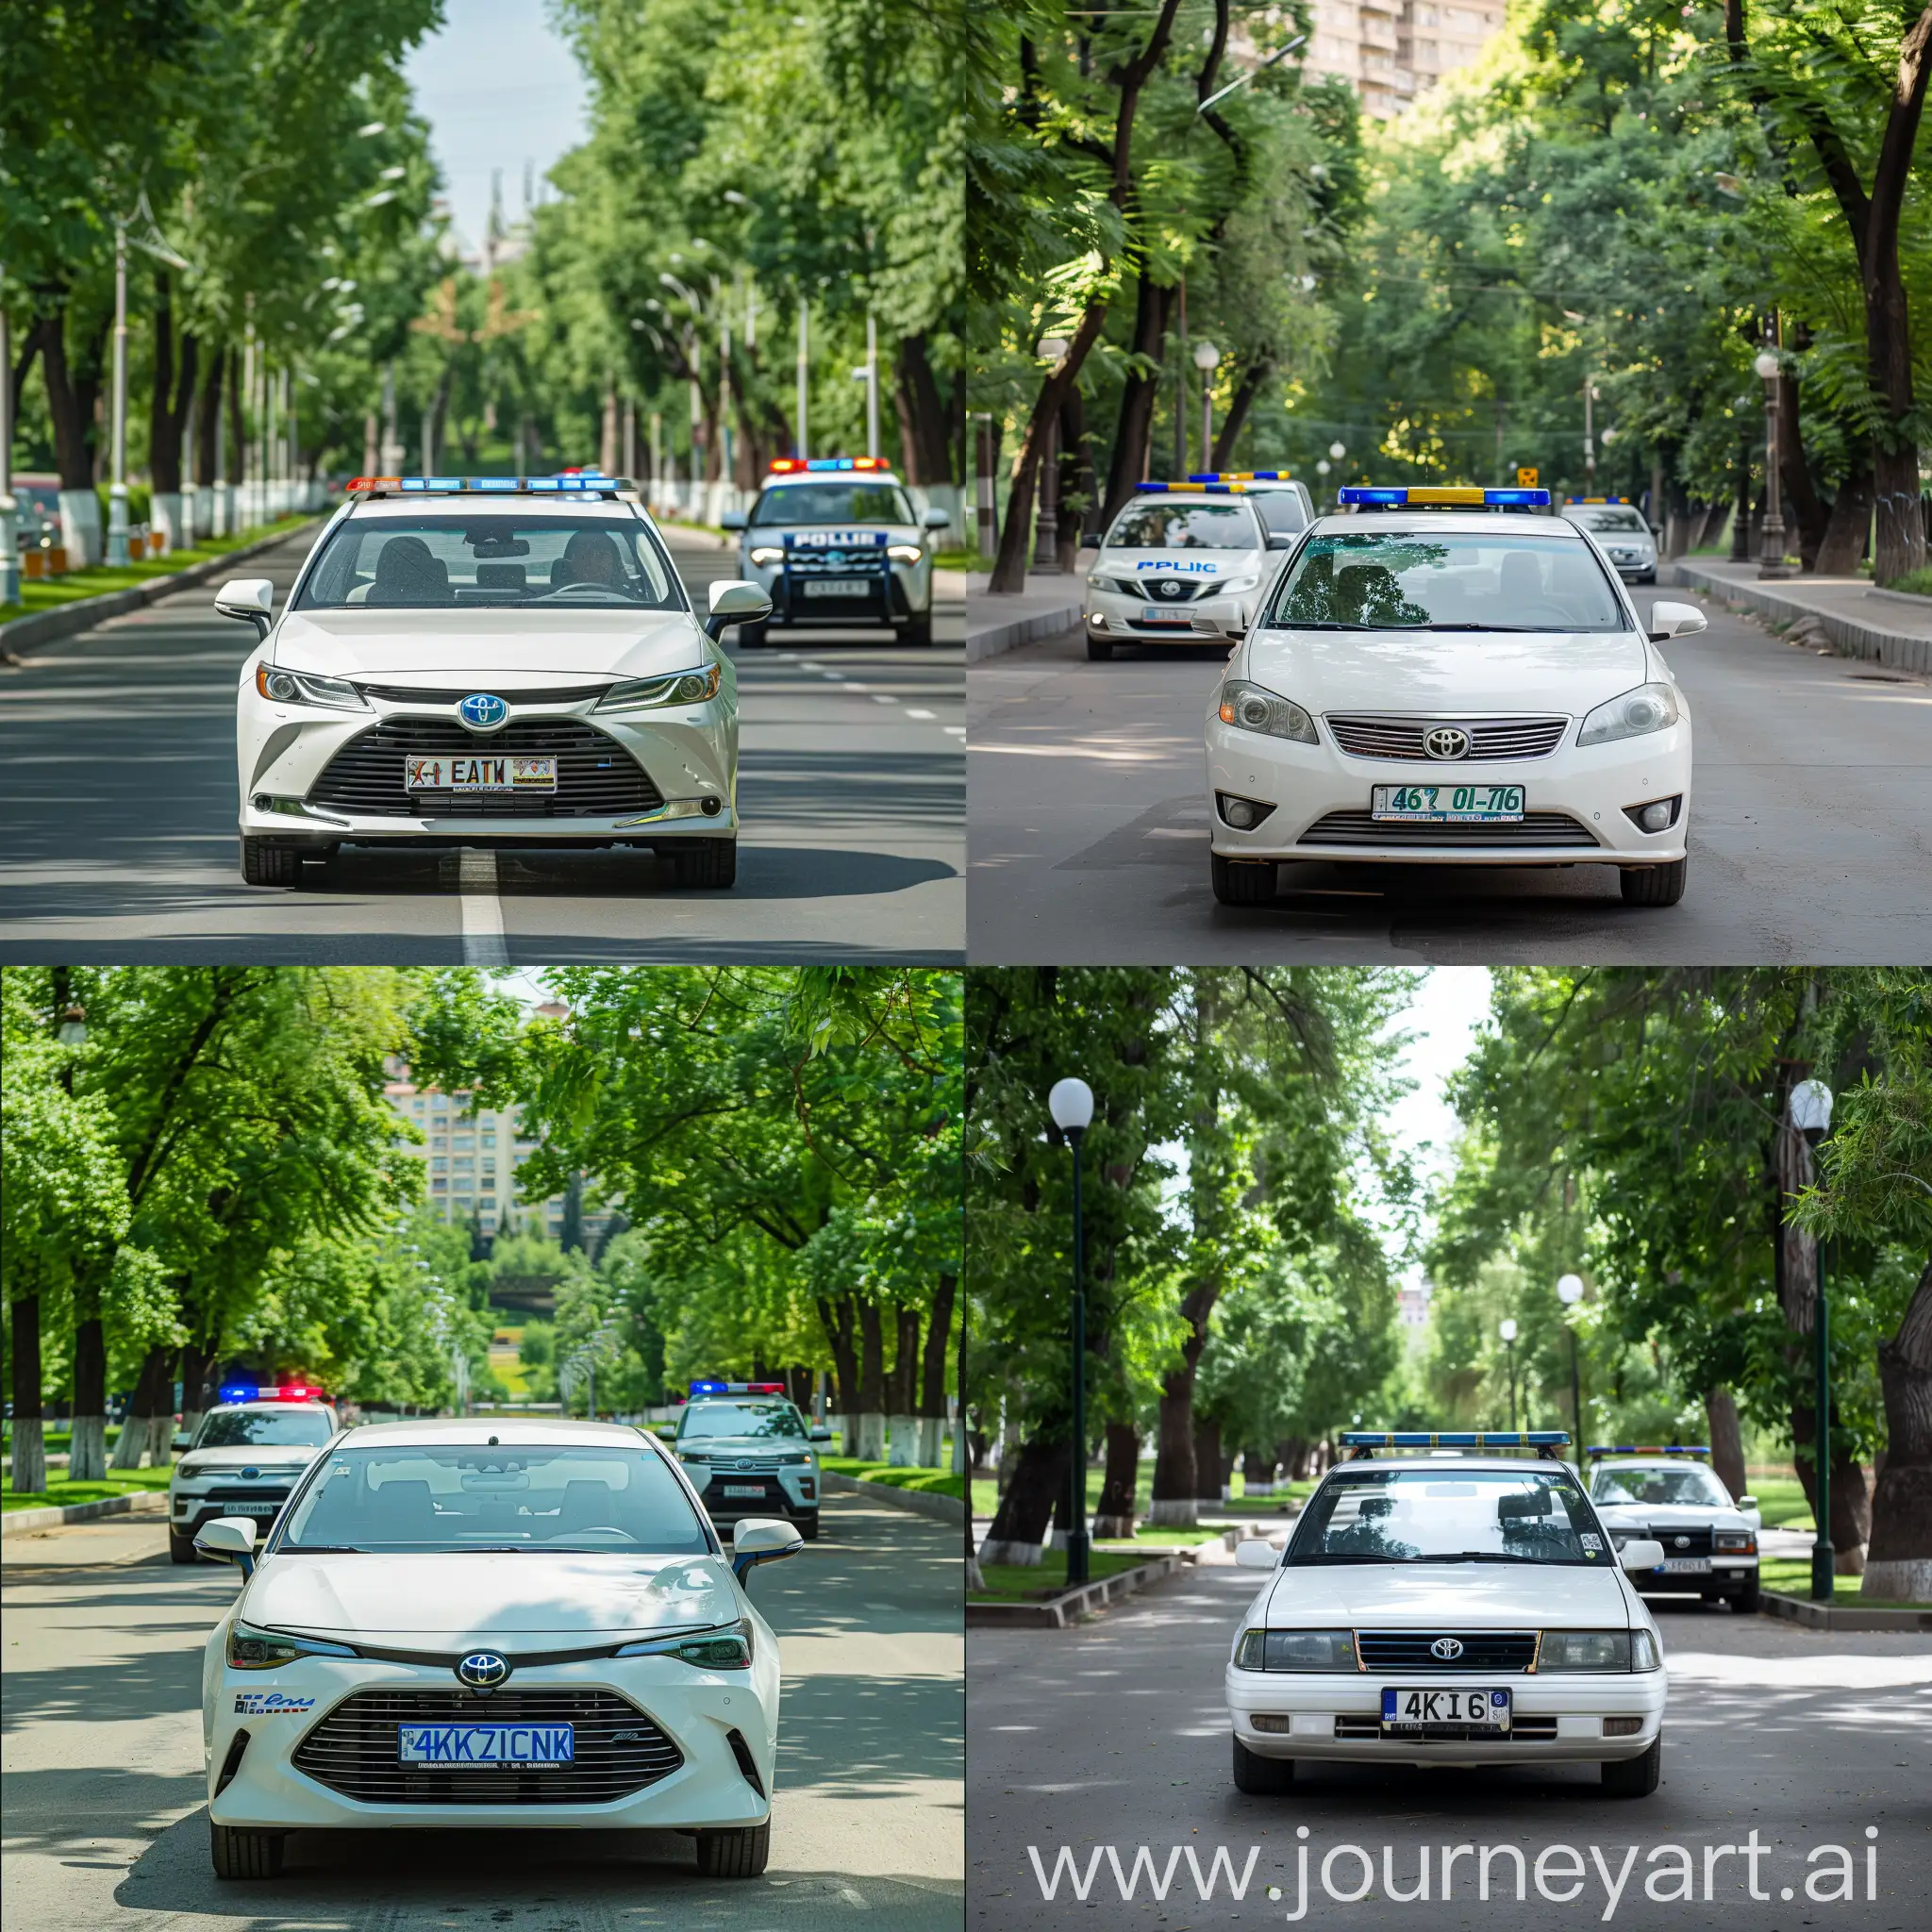 Toyota Estima is white, Armenian state license plate, Almaty city, there are many green trees around, two patrol police cars nearby, 4K, clear image